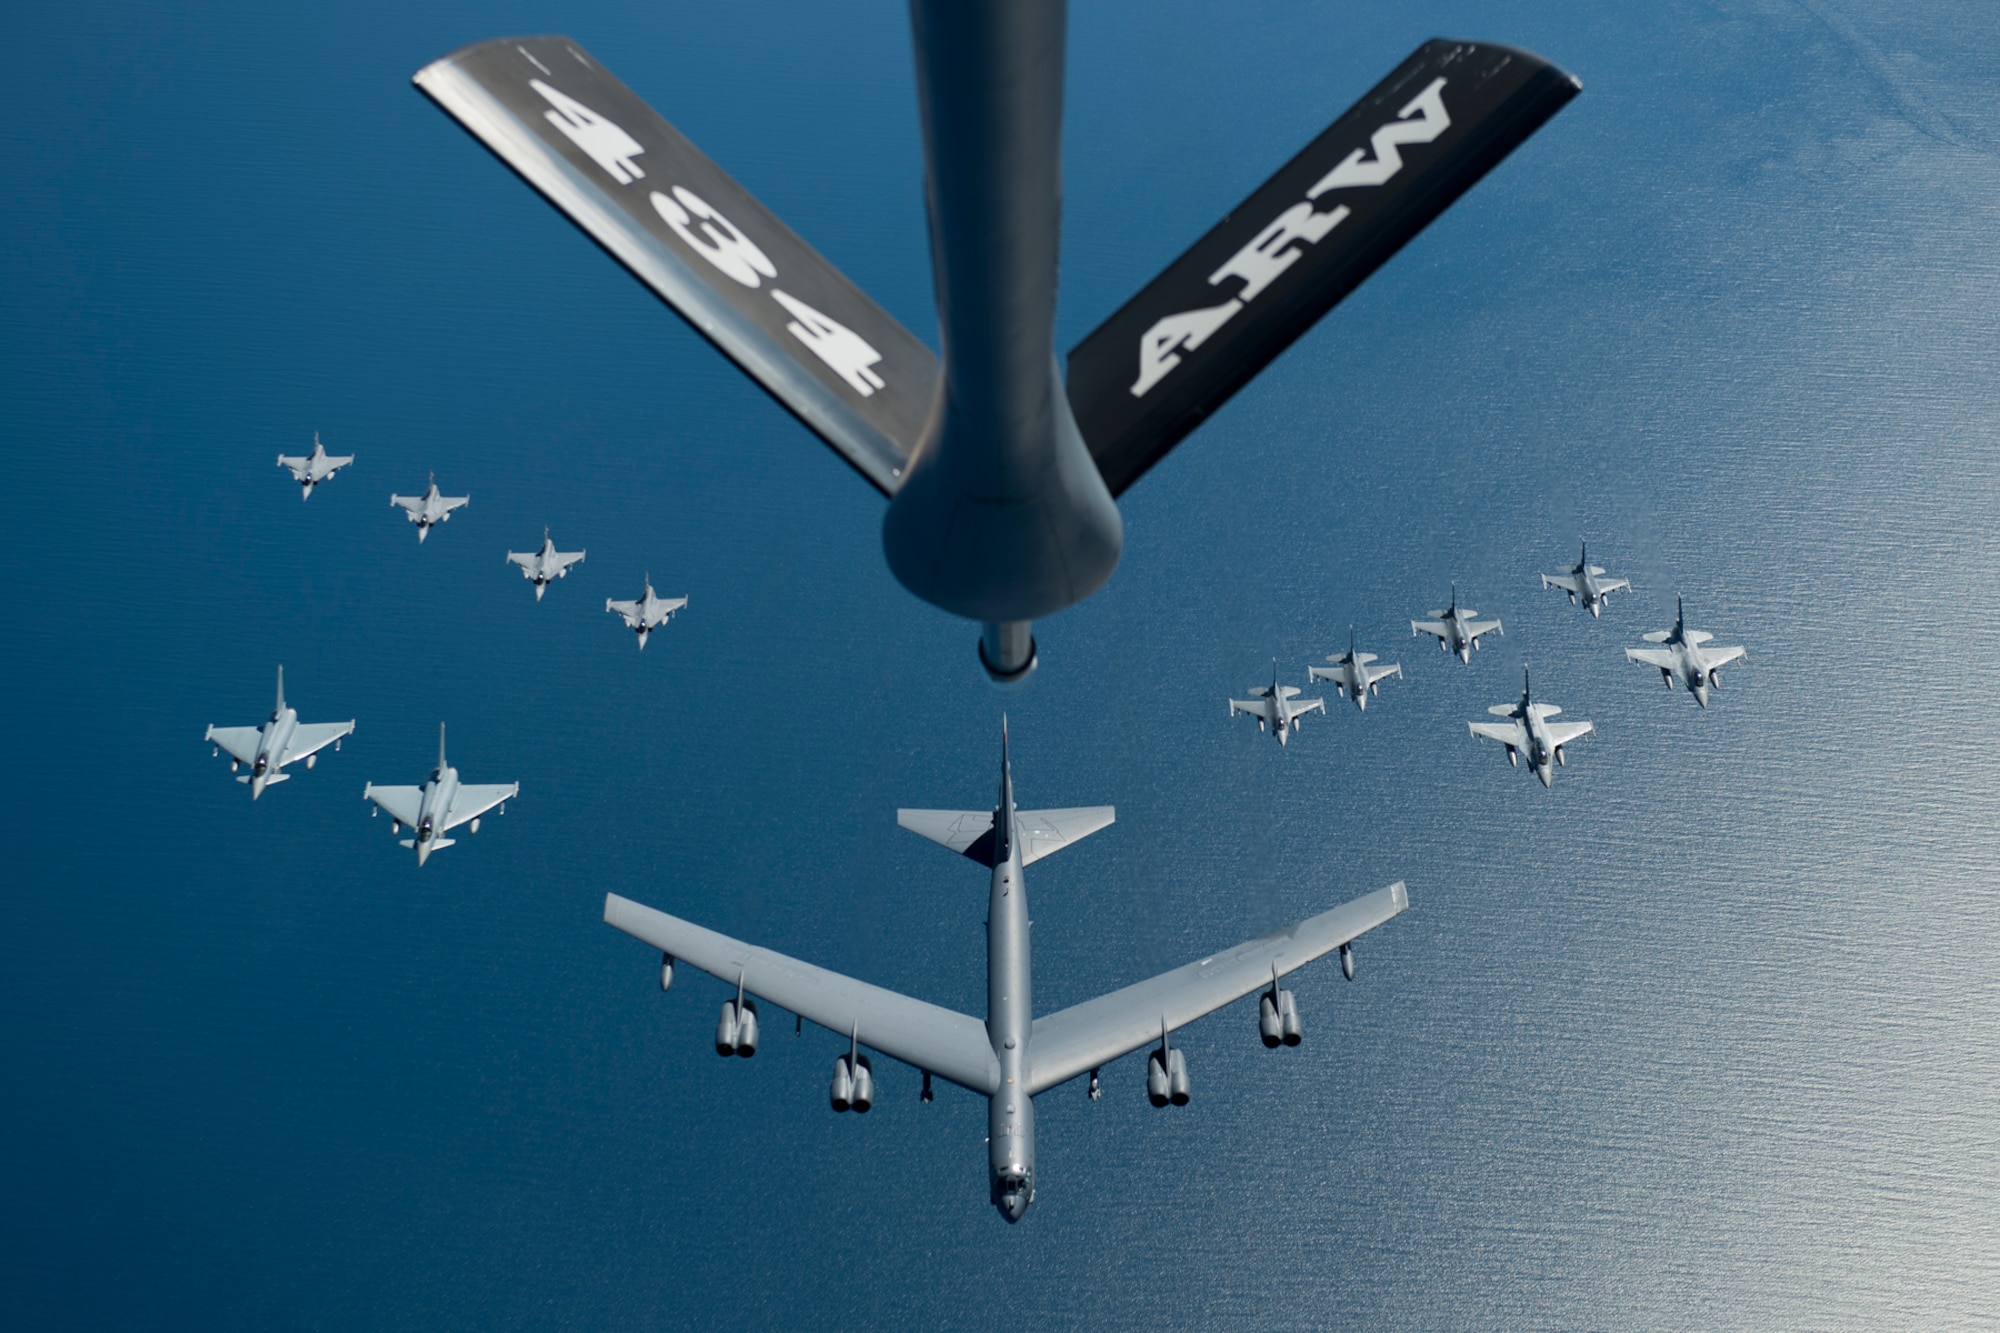 A U.S. Air Force B-52 Stratofortress leads a formation of aircraft including two Polish air force F-16 Fighting Falcons, four U.S. Air Force F-16 Fighting Falcons, two German Eurofighter Typhoons and four Swedish Gripens over the Baltic Sea, June 9, 2016. The formation was captured from a KC-135 from the 434th Air Refueling Wing, Grissom Air Force Base, Indiana as part of exercise BALTOPS 2016. (U.S. Air Force photo/Senior Airman Erin Babis)